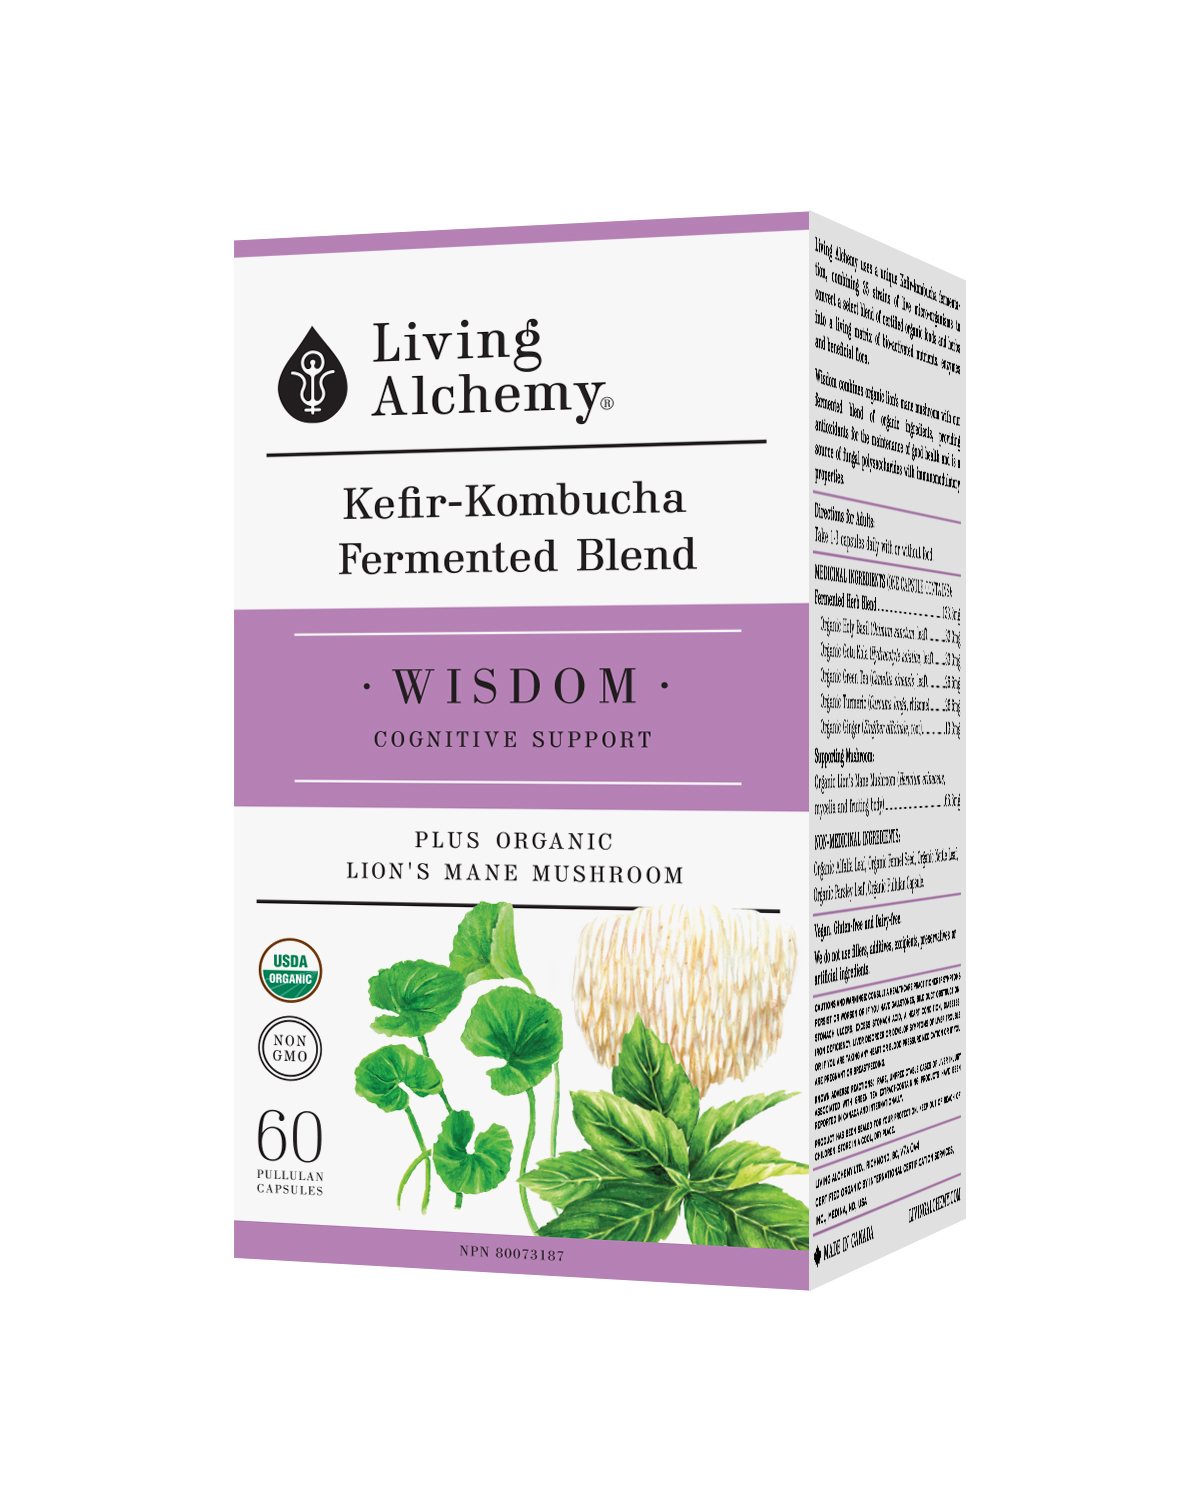 Living Alchemy Wisdom: Cognitive Support 60 Pullulan Capsules